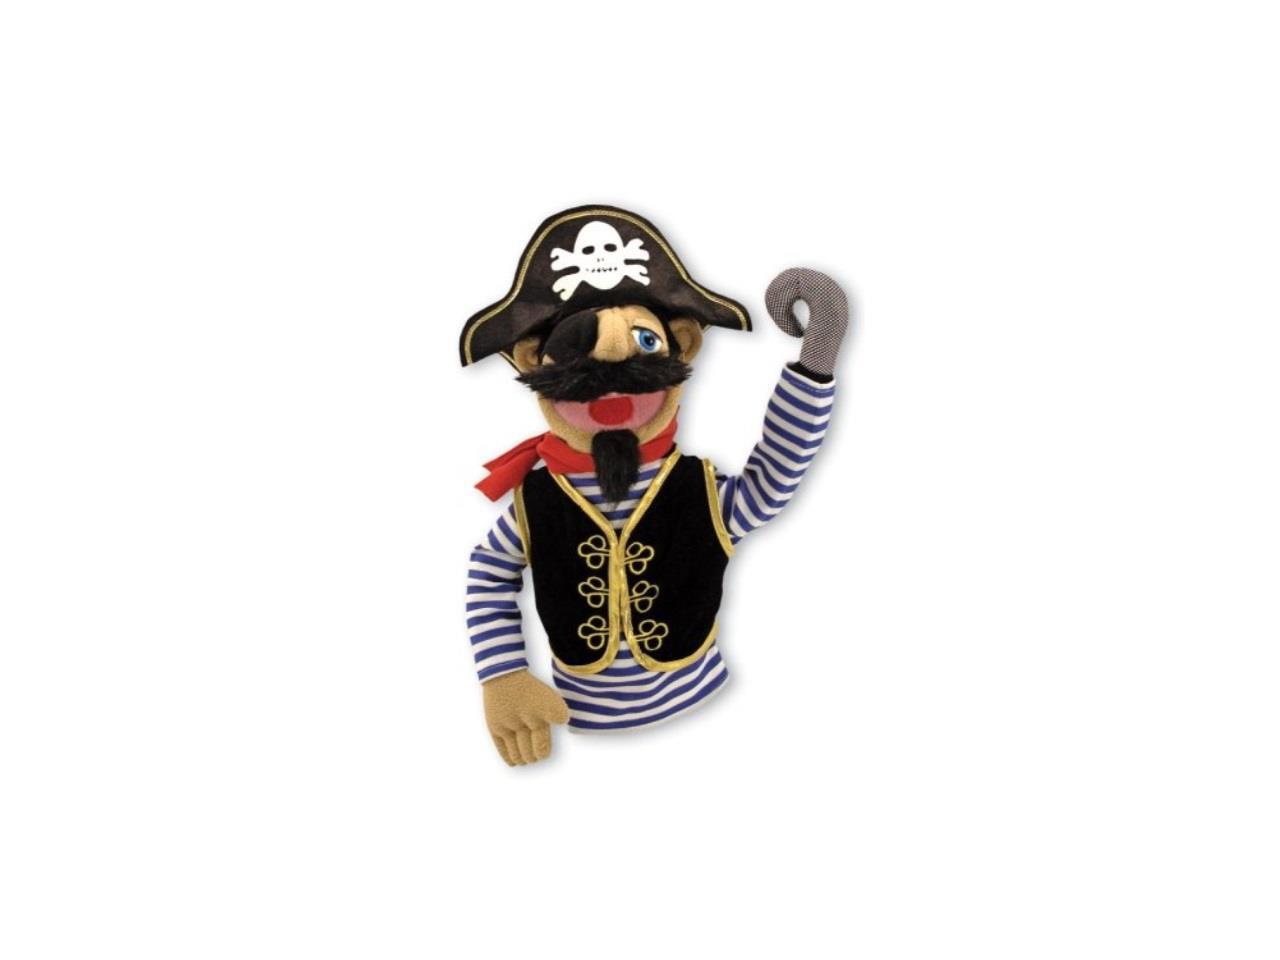 Puppets & Puppet Theaters, Animated Gestures, Inspires Creativity, 38.1 cm H x 12.7 cm W x 16.51 cm L Melissa & Doug Pirate Puppet with Detachable Wooden Rod